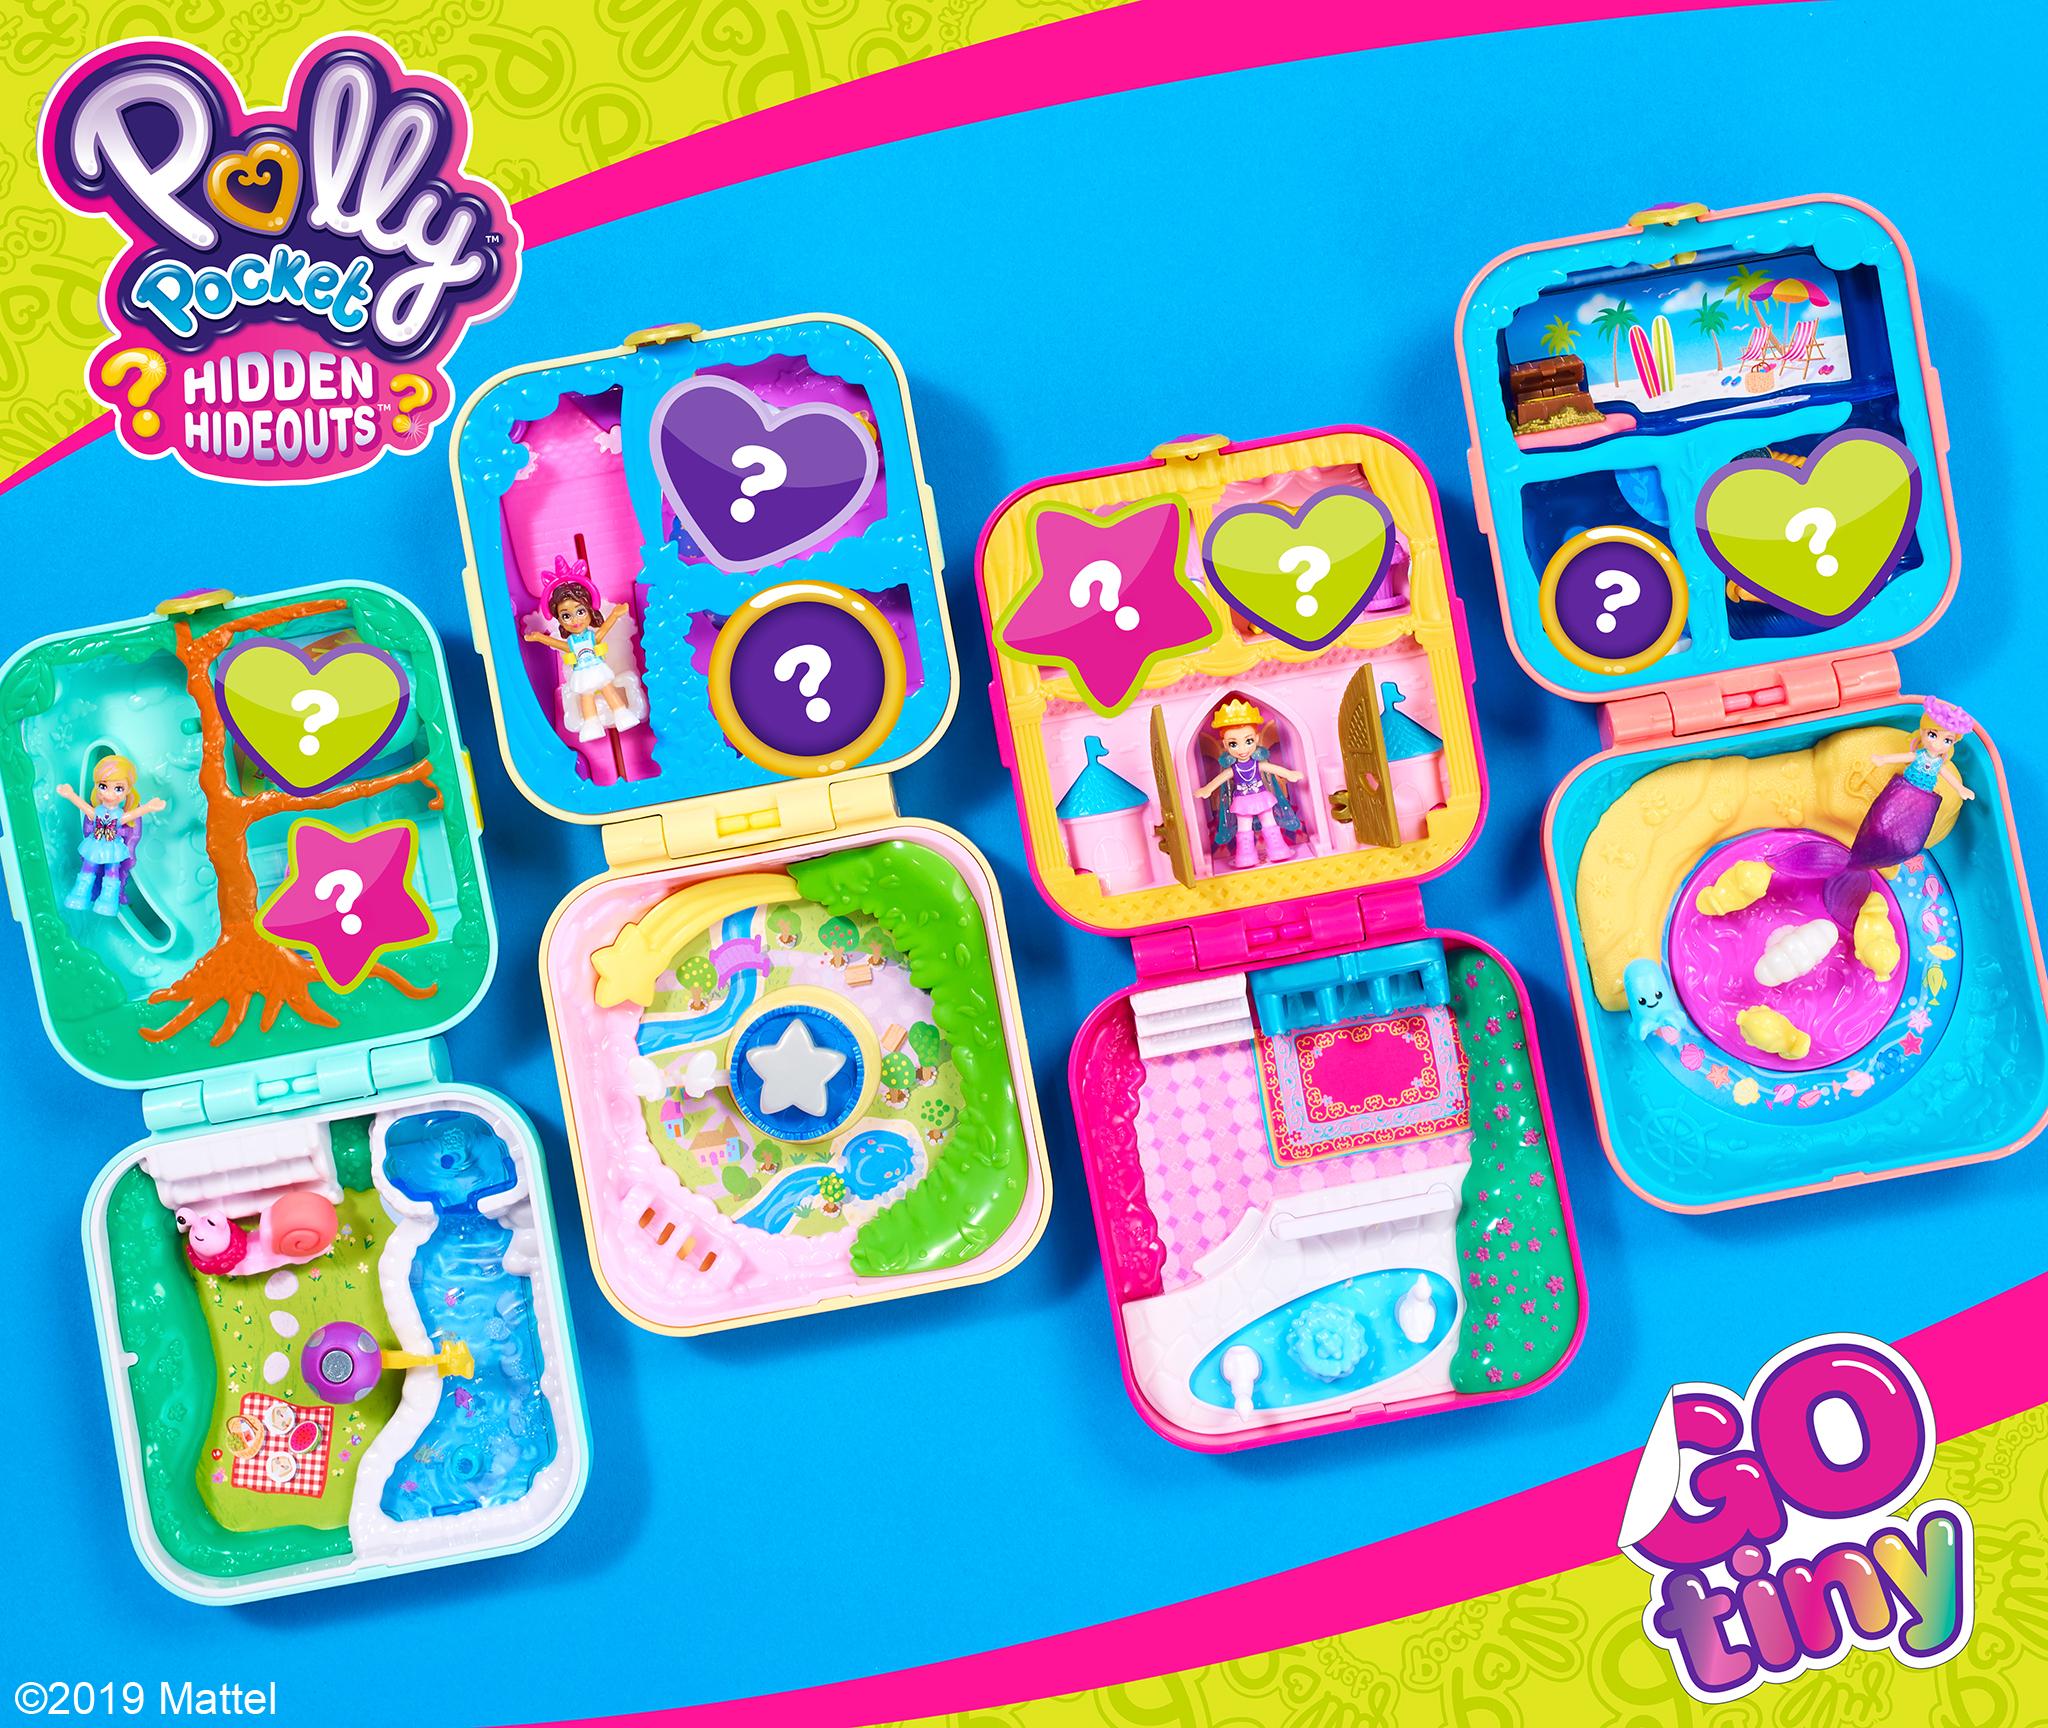 MATTEL sur X : Sneaky sneaky! 😱💕 The latest line of Polly Pocket  compacts has three secret compartments hidden behind peel-away panels. Your  tiny ones will have to collect them all to